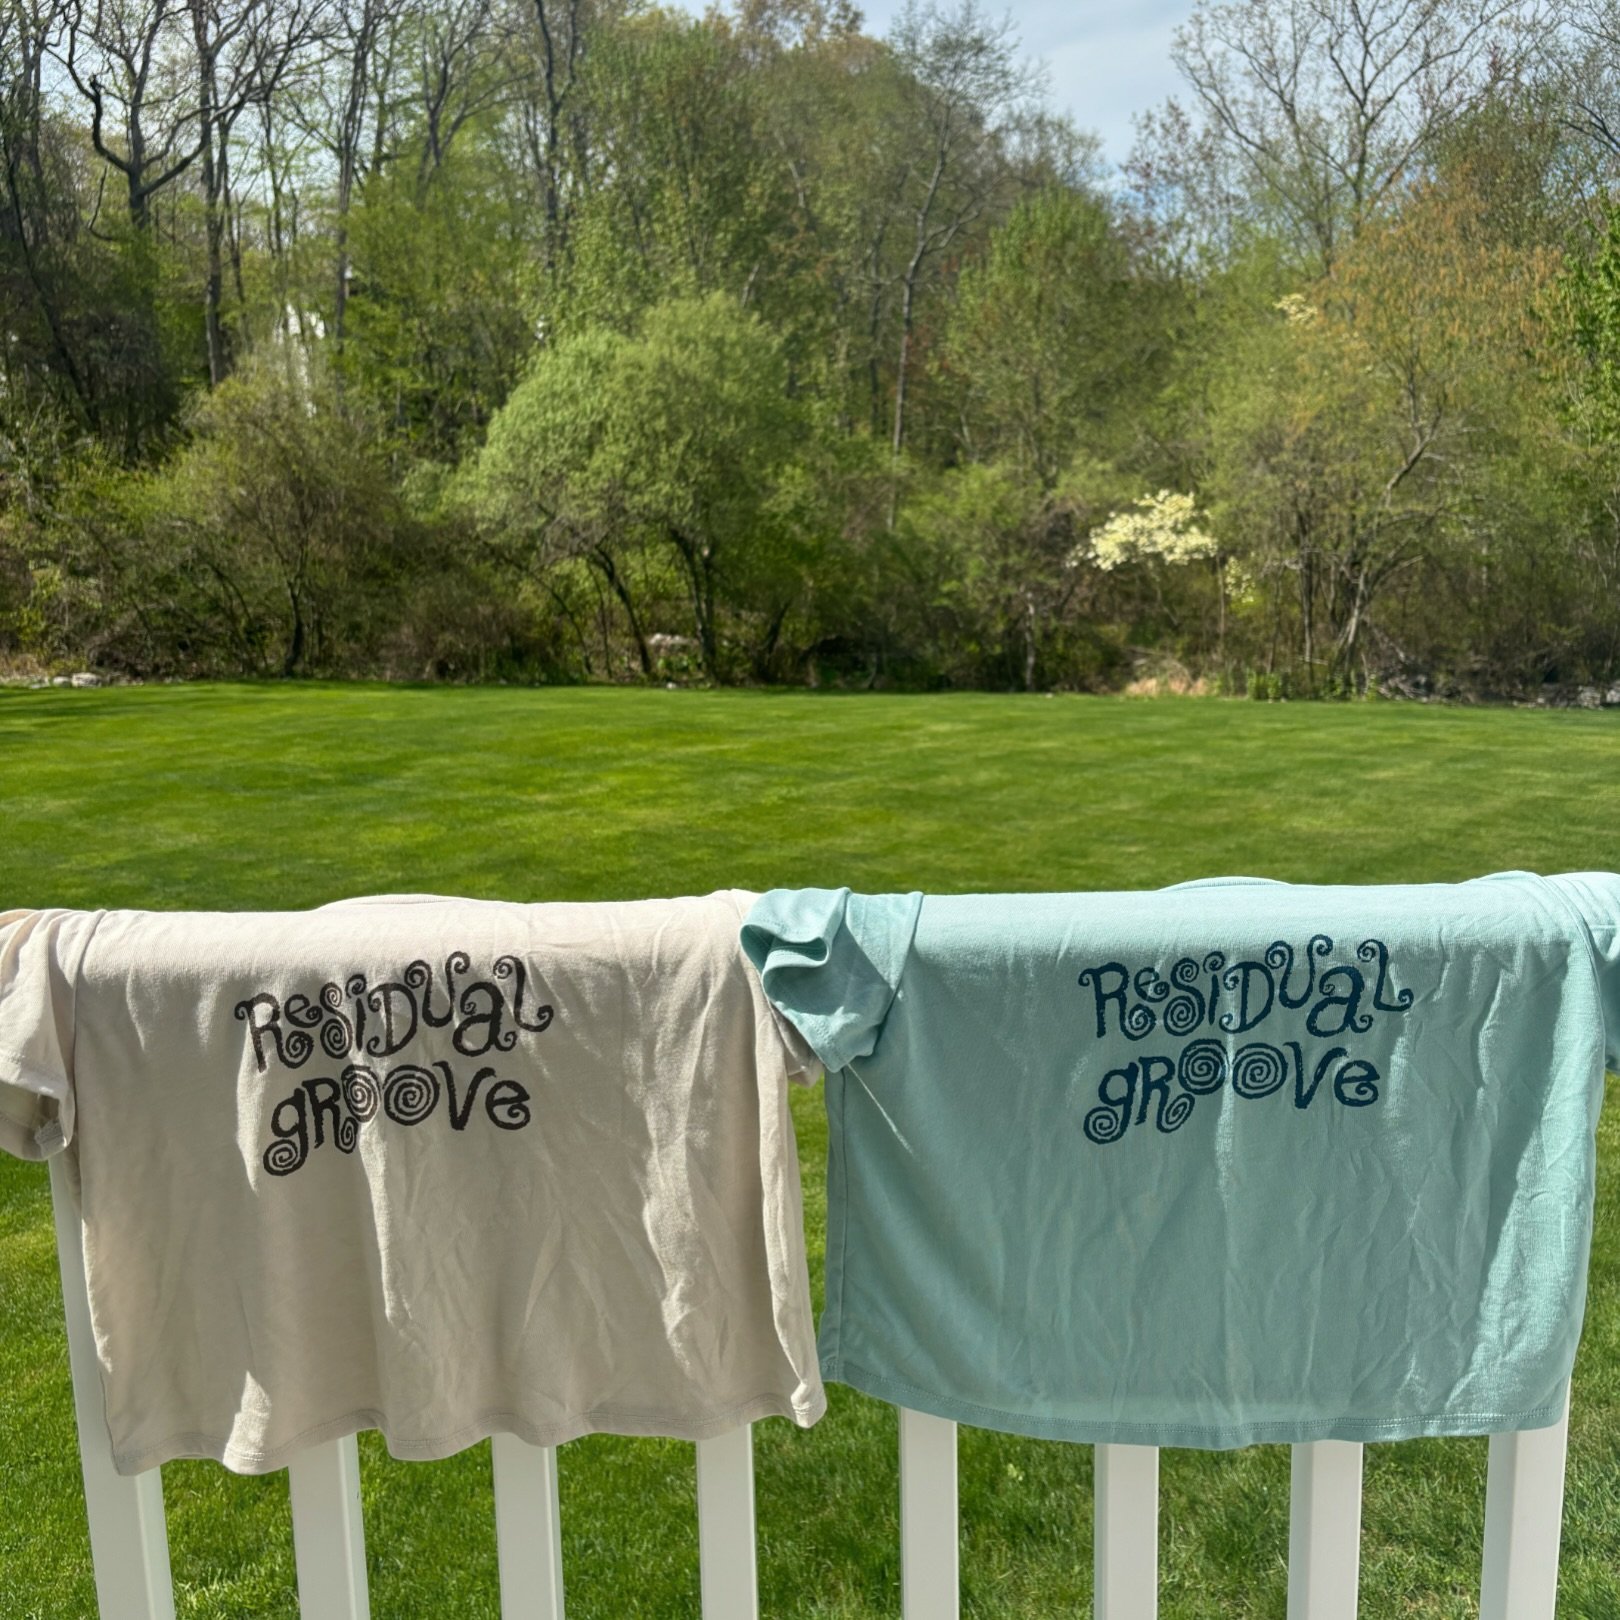 We will be locked and loaded with Spring/Summer merch this TUES 5/7 at @parkcitymusichall for our Woodstock themed Resi-Dency show , including these comfy crop-tops courtesy of @andhowgraphics ! Design by @dres.designs 💪❤️

See y&rsquo;all Tuesday! 